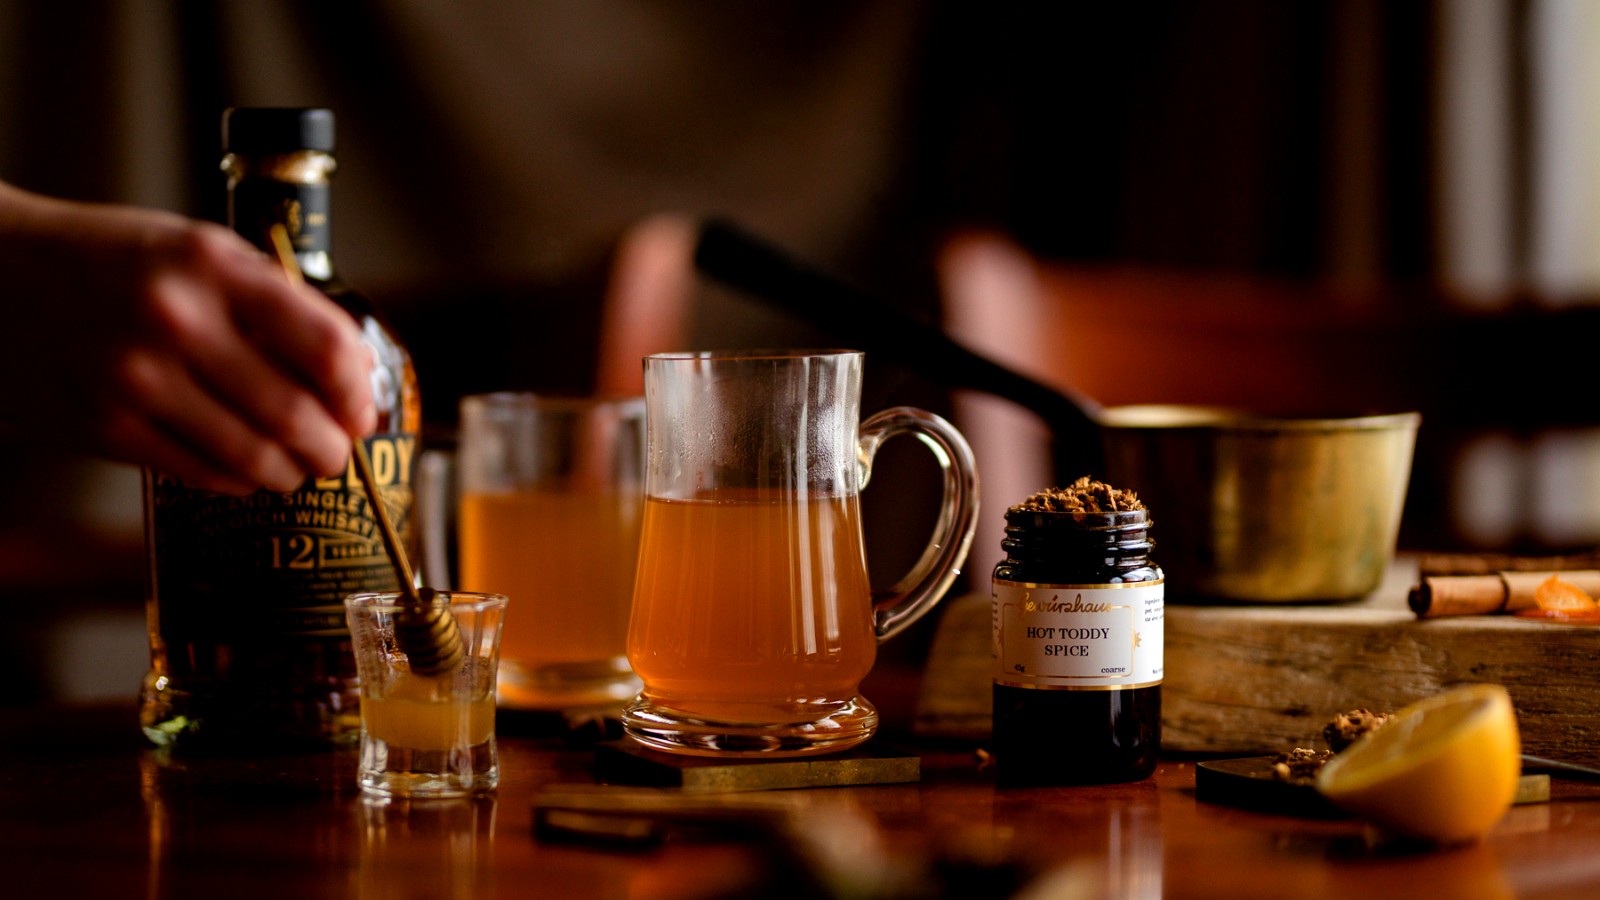 Image of Spiced Hot Toddy